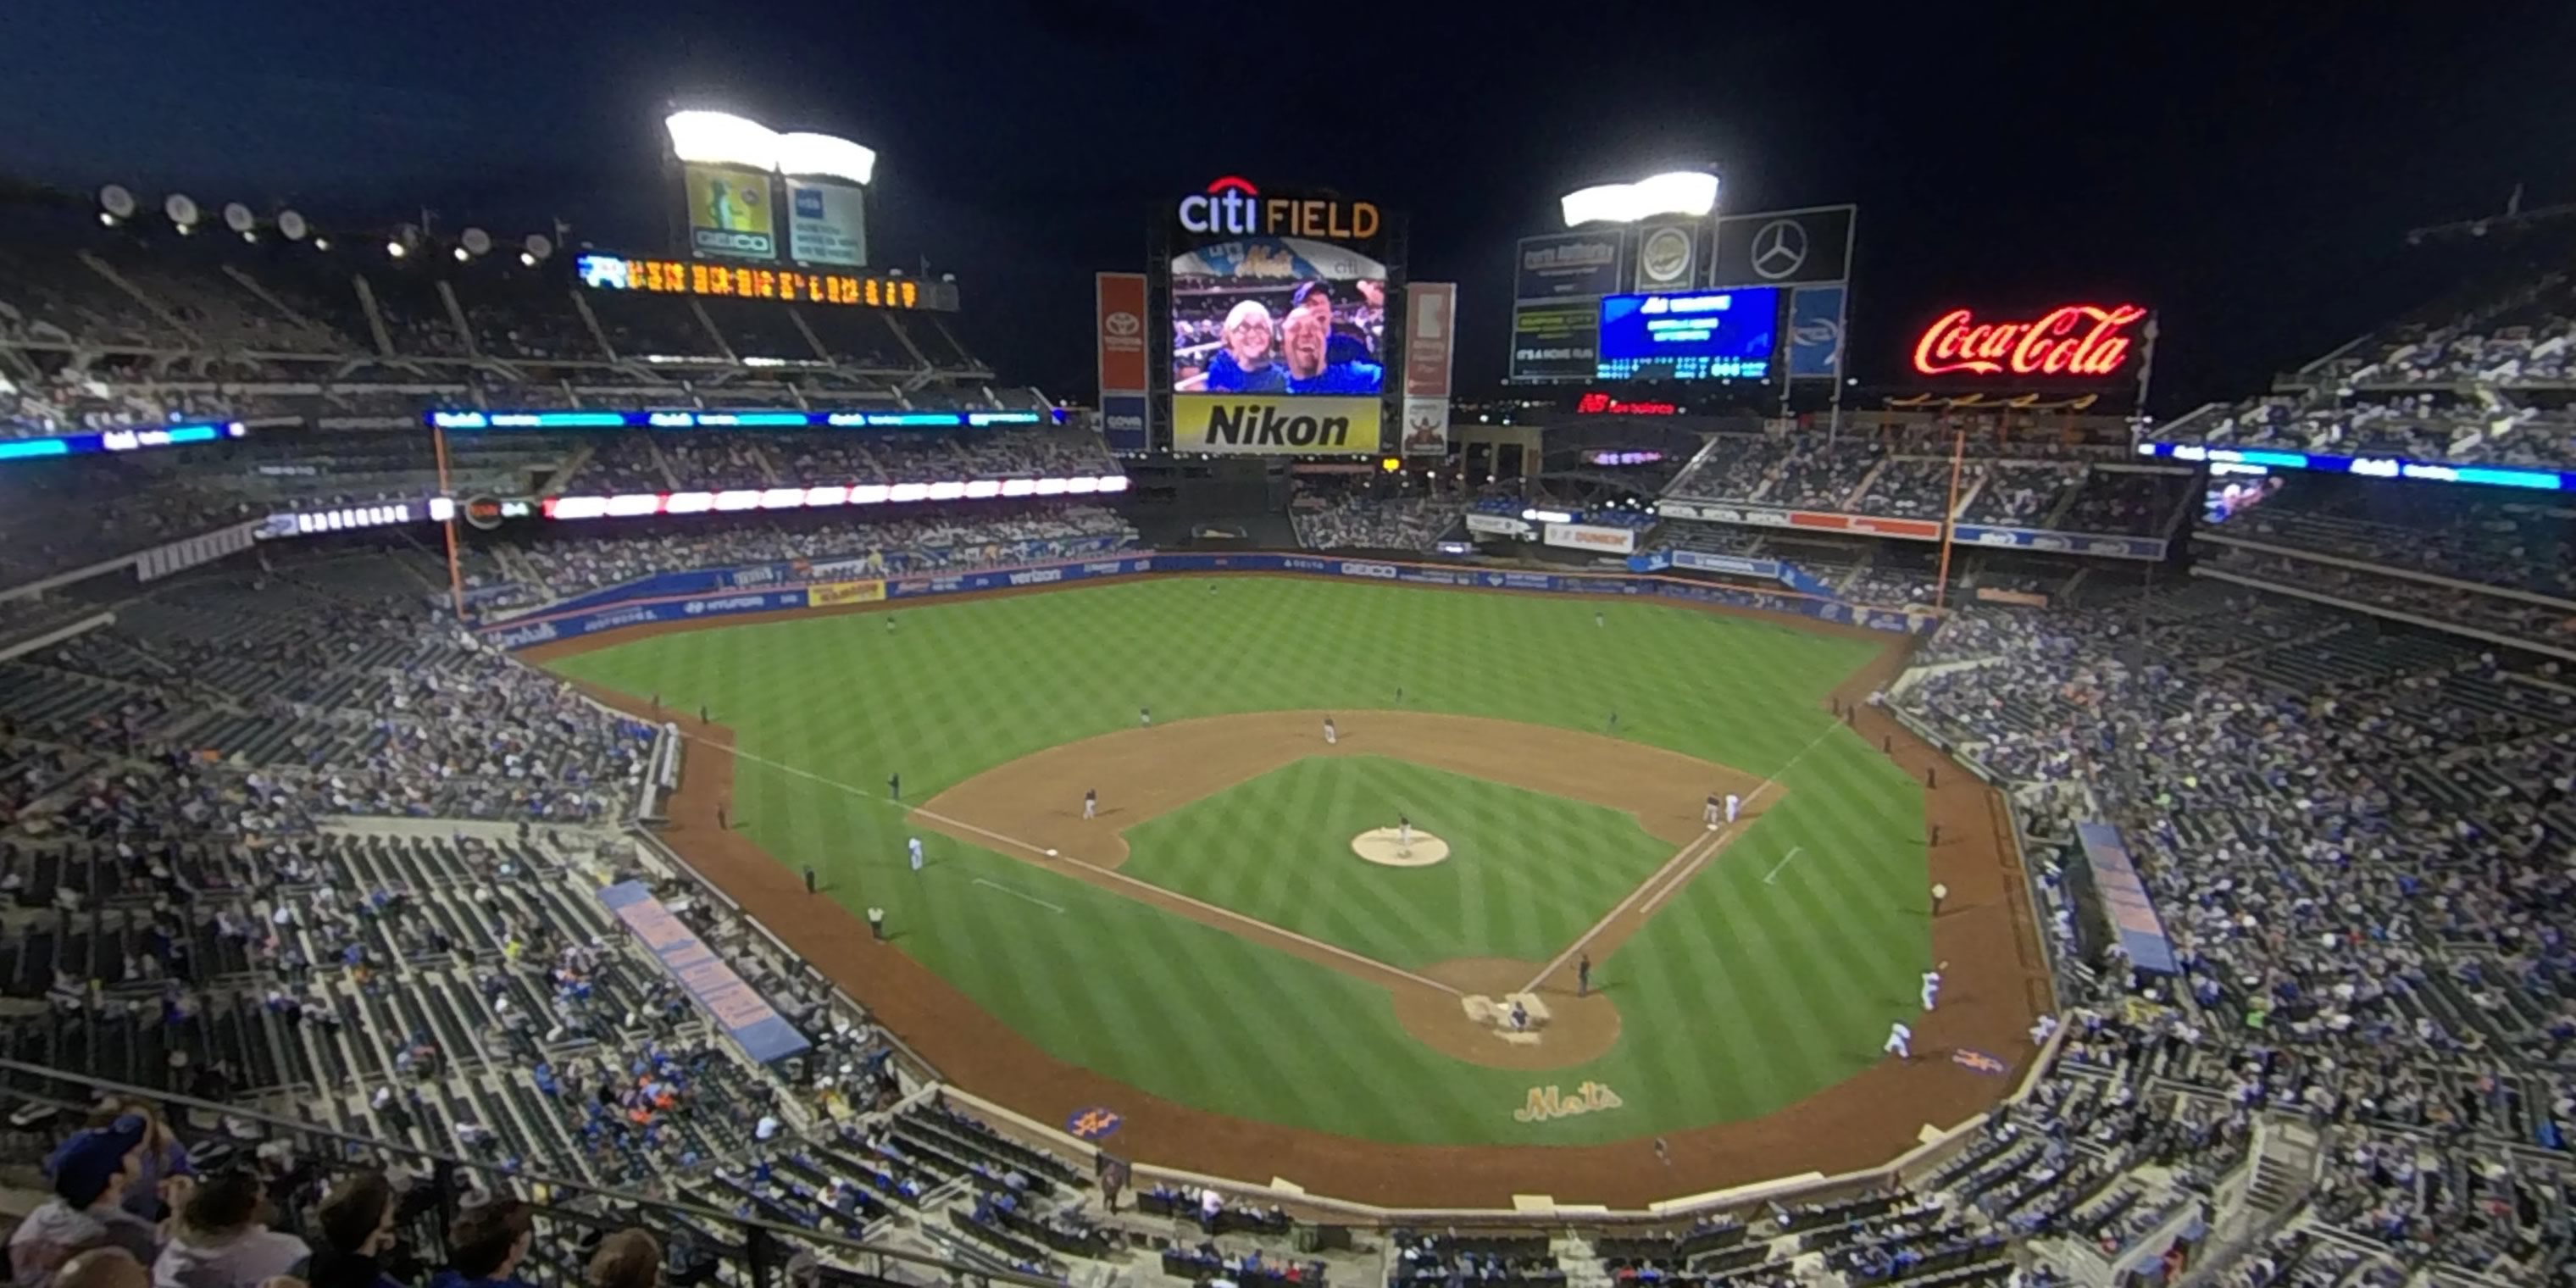 section 416 panoramic seat view  - citi field